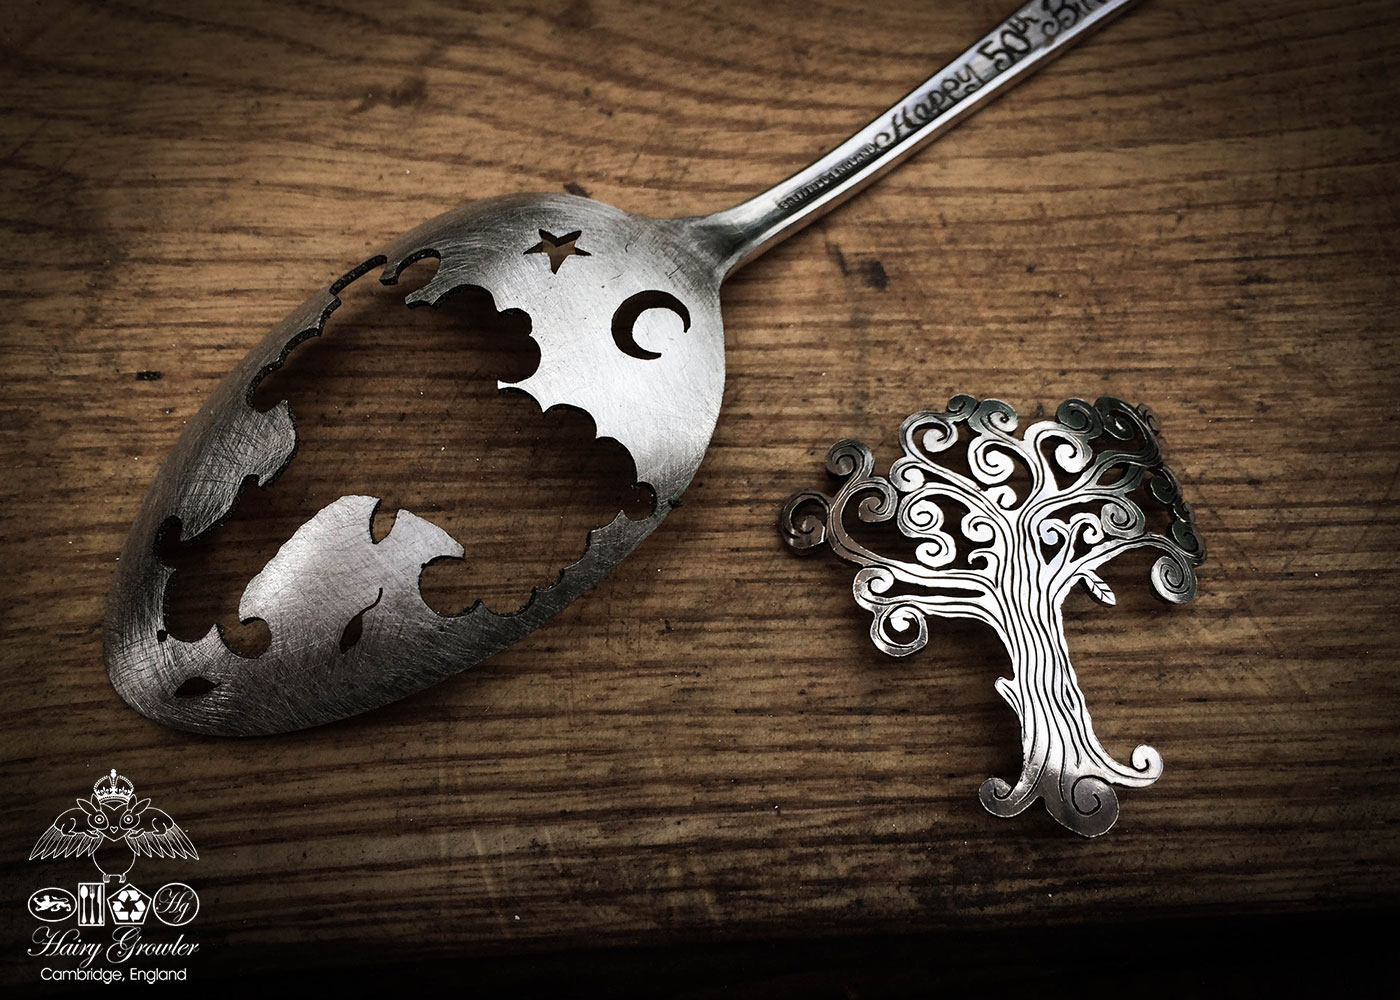 handcrafted and recycled spoon Fibonacci spiral tree brooch